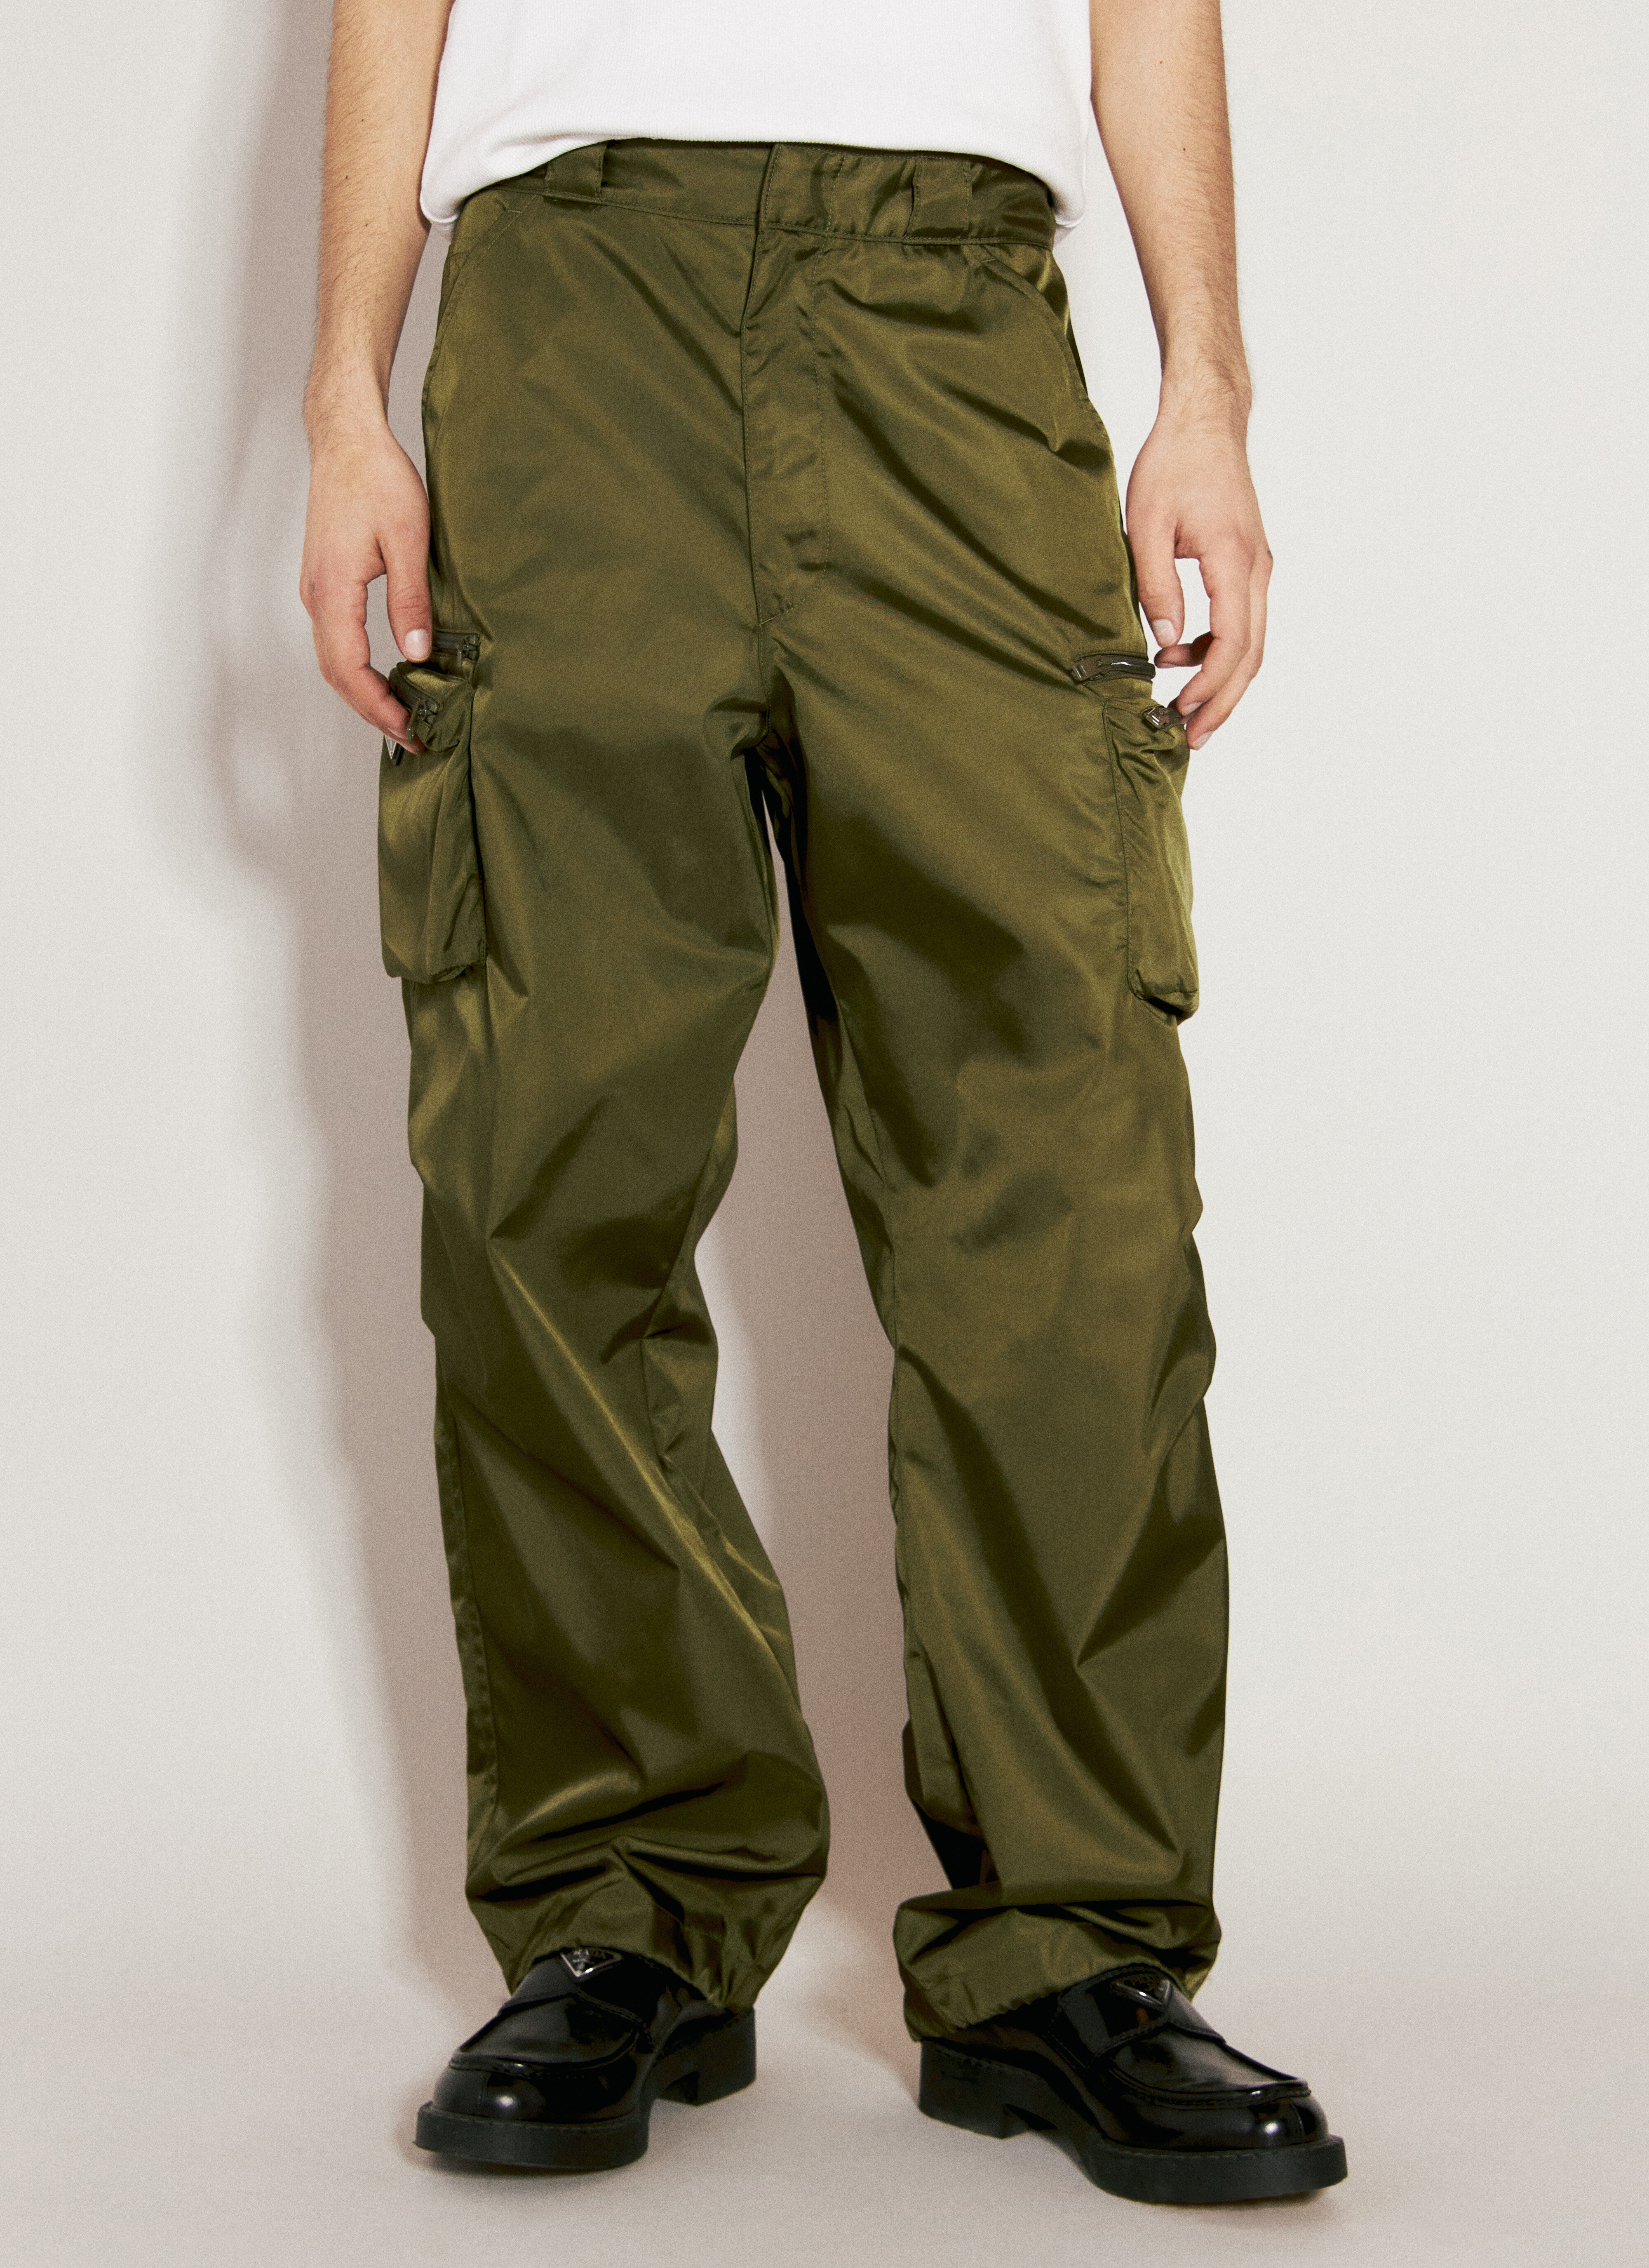 MHL by Margaret Howell Re-Nylon Cargo Pants Brown mhl0156013